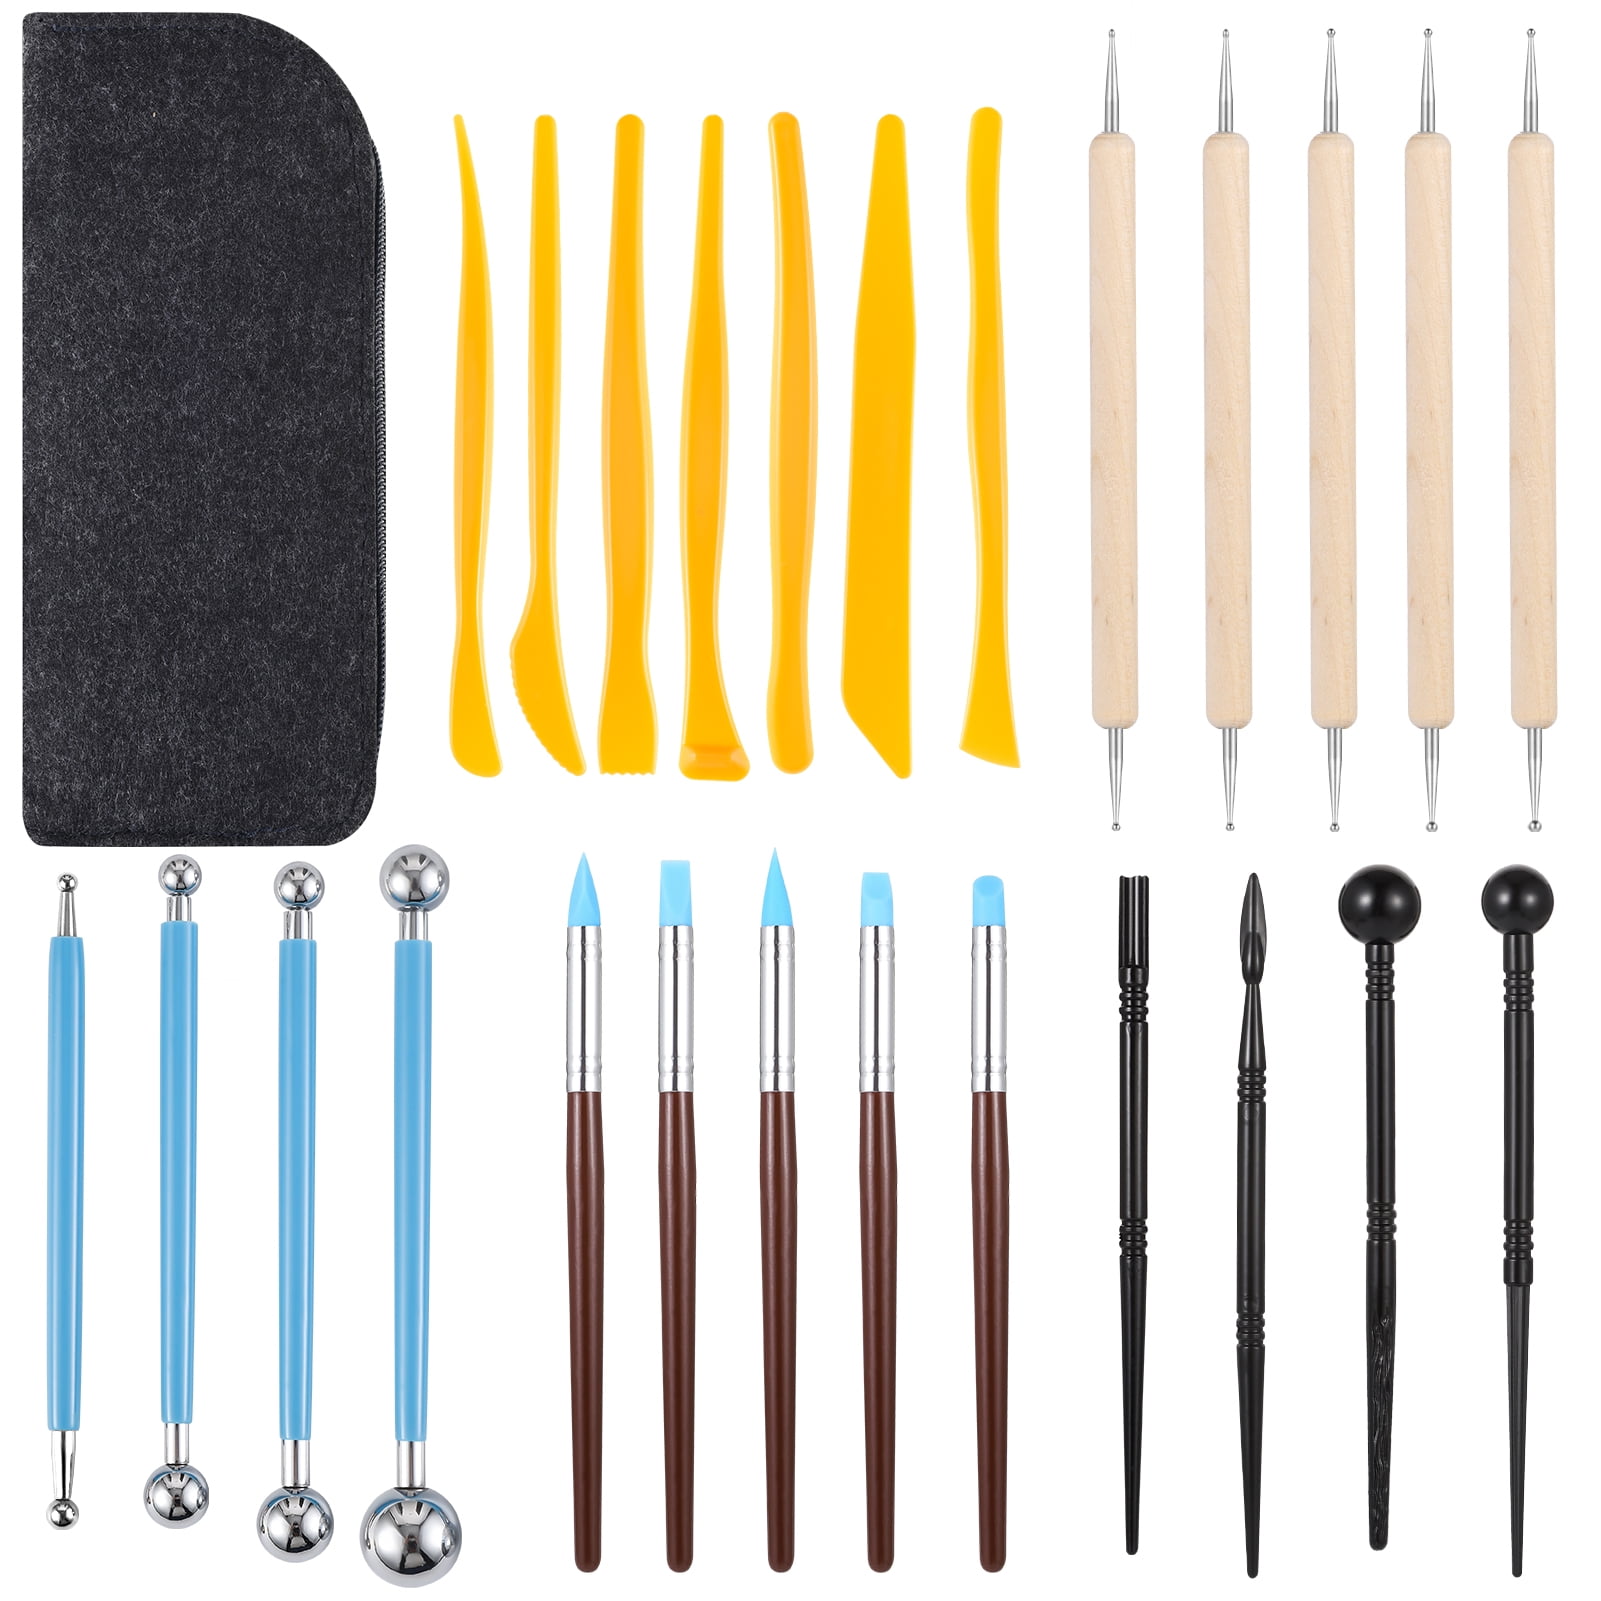 Sculpt Pro Pottery Tool Starter Kit - 15-Piece 26-Tool Beginner's Clay  Sculpting Set - Free Carrying Case Included - Great Gift